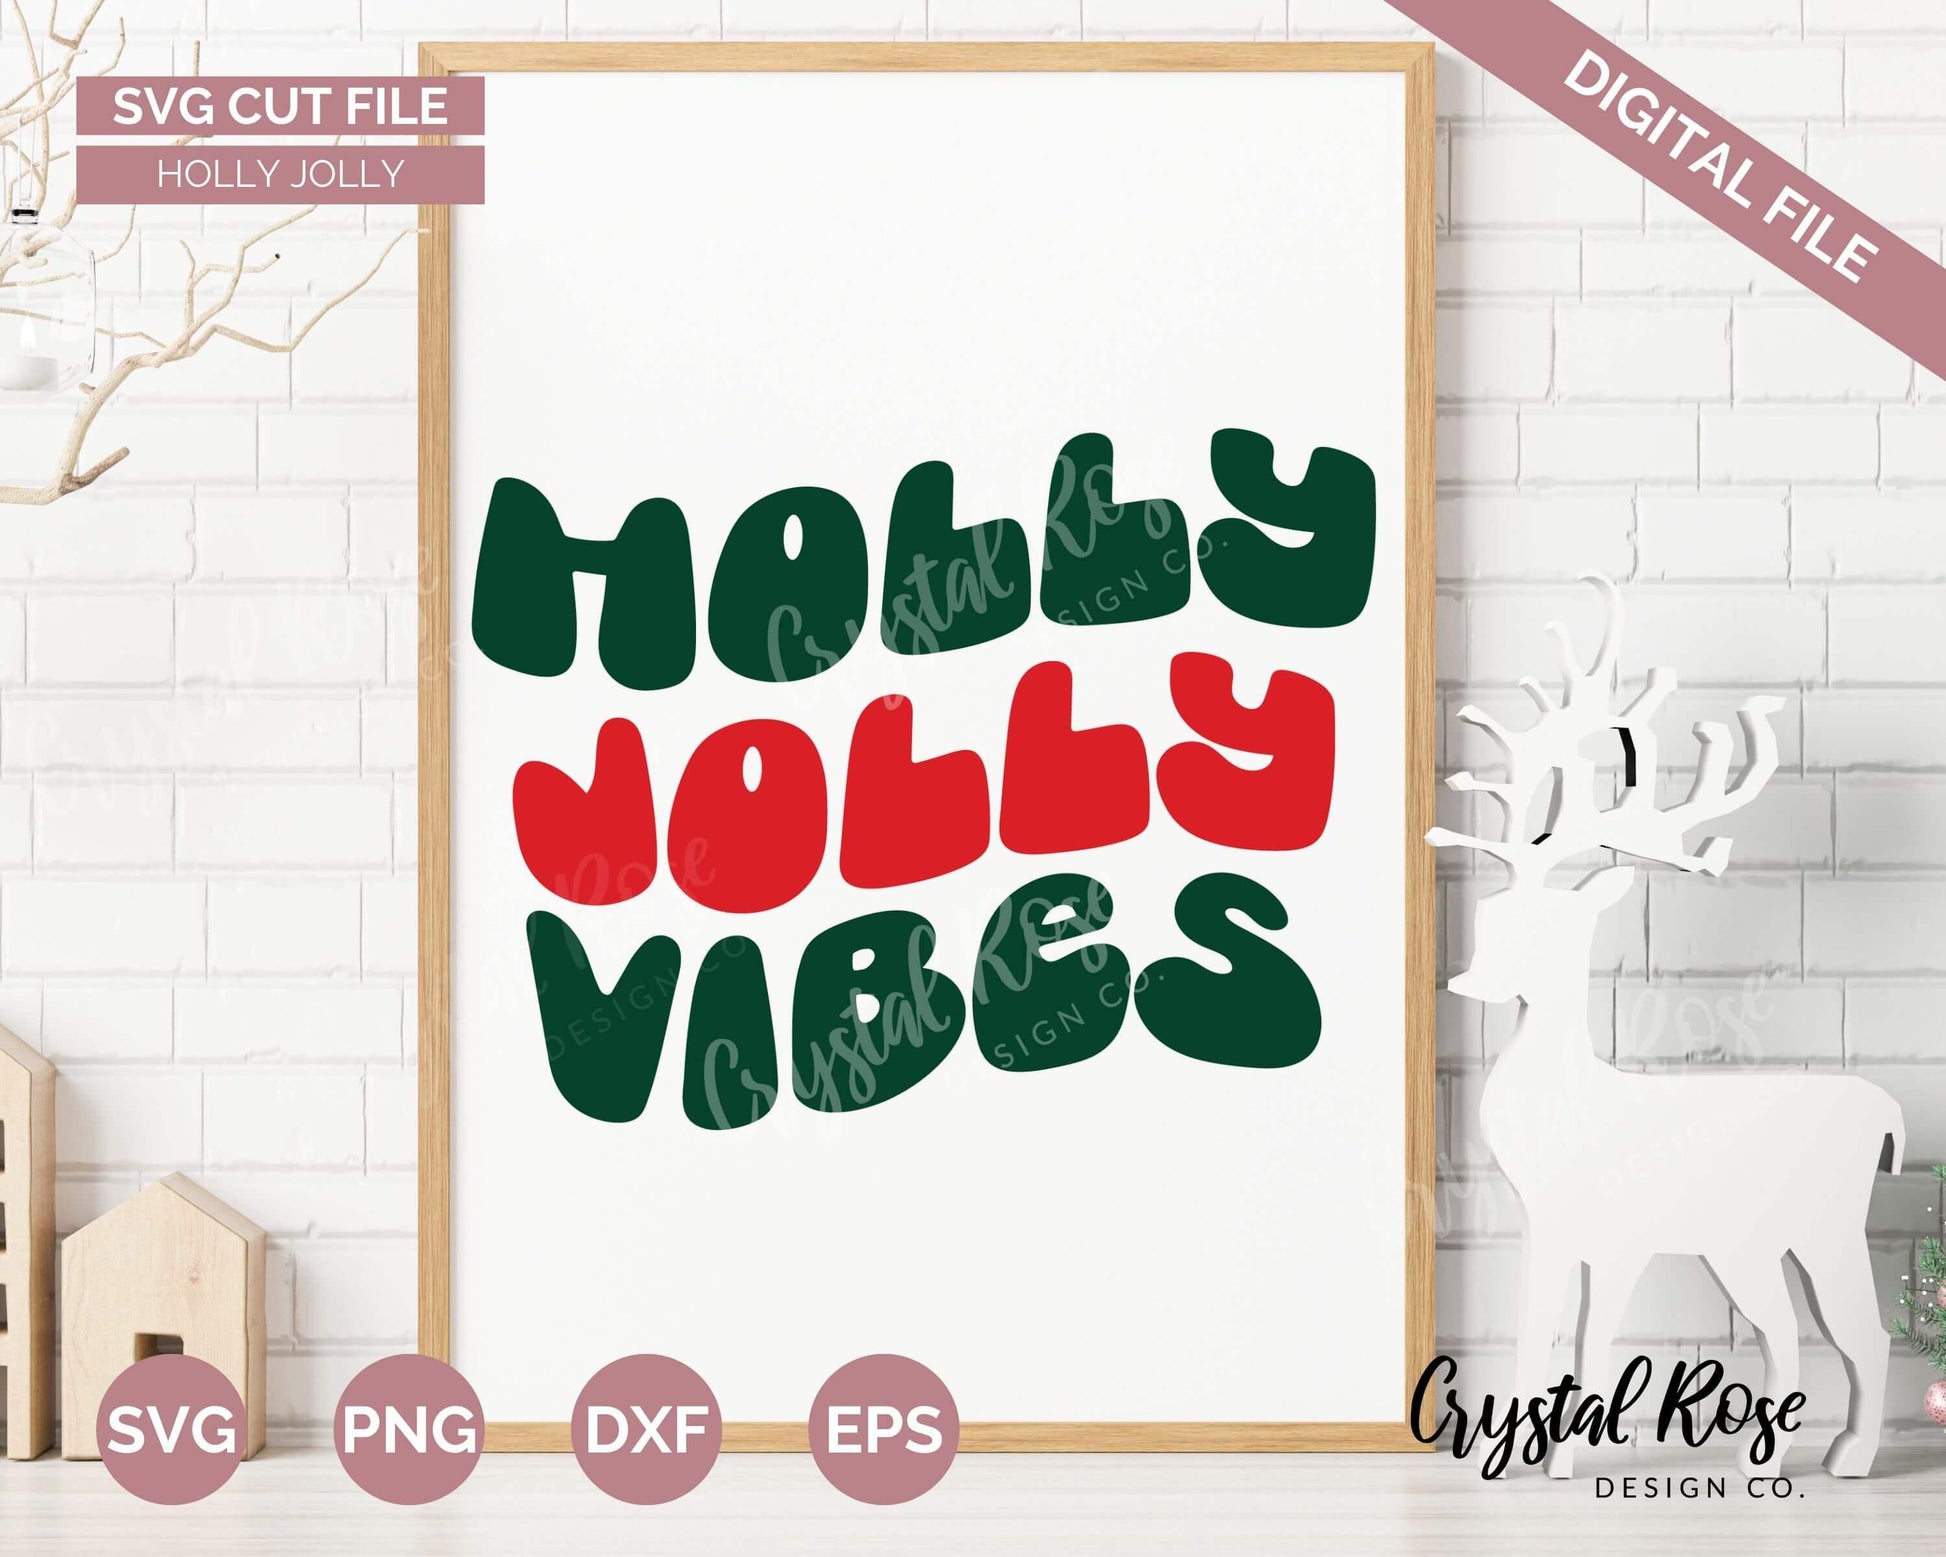 Retro Holly Jolly Vibes SVG, Digital Download, Cricut, Silhouette, Glowforge (includes svg/png/dxf/eps) - Crystal Rose Design Co.